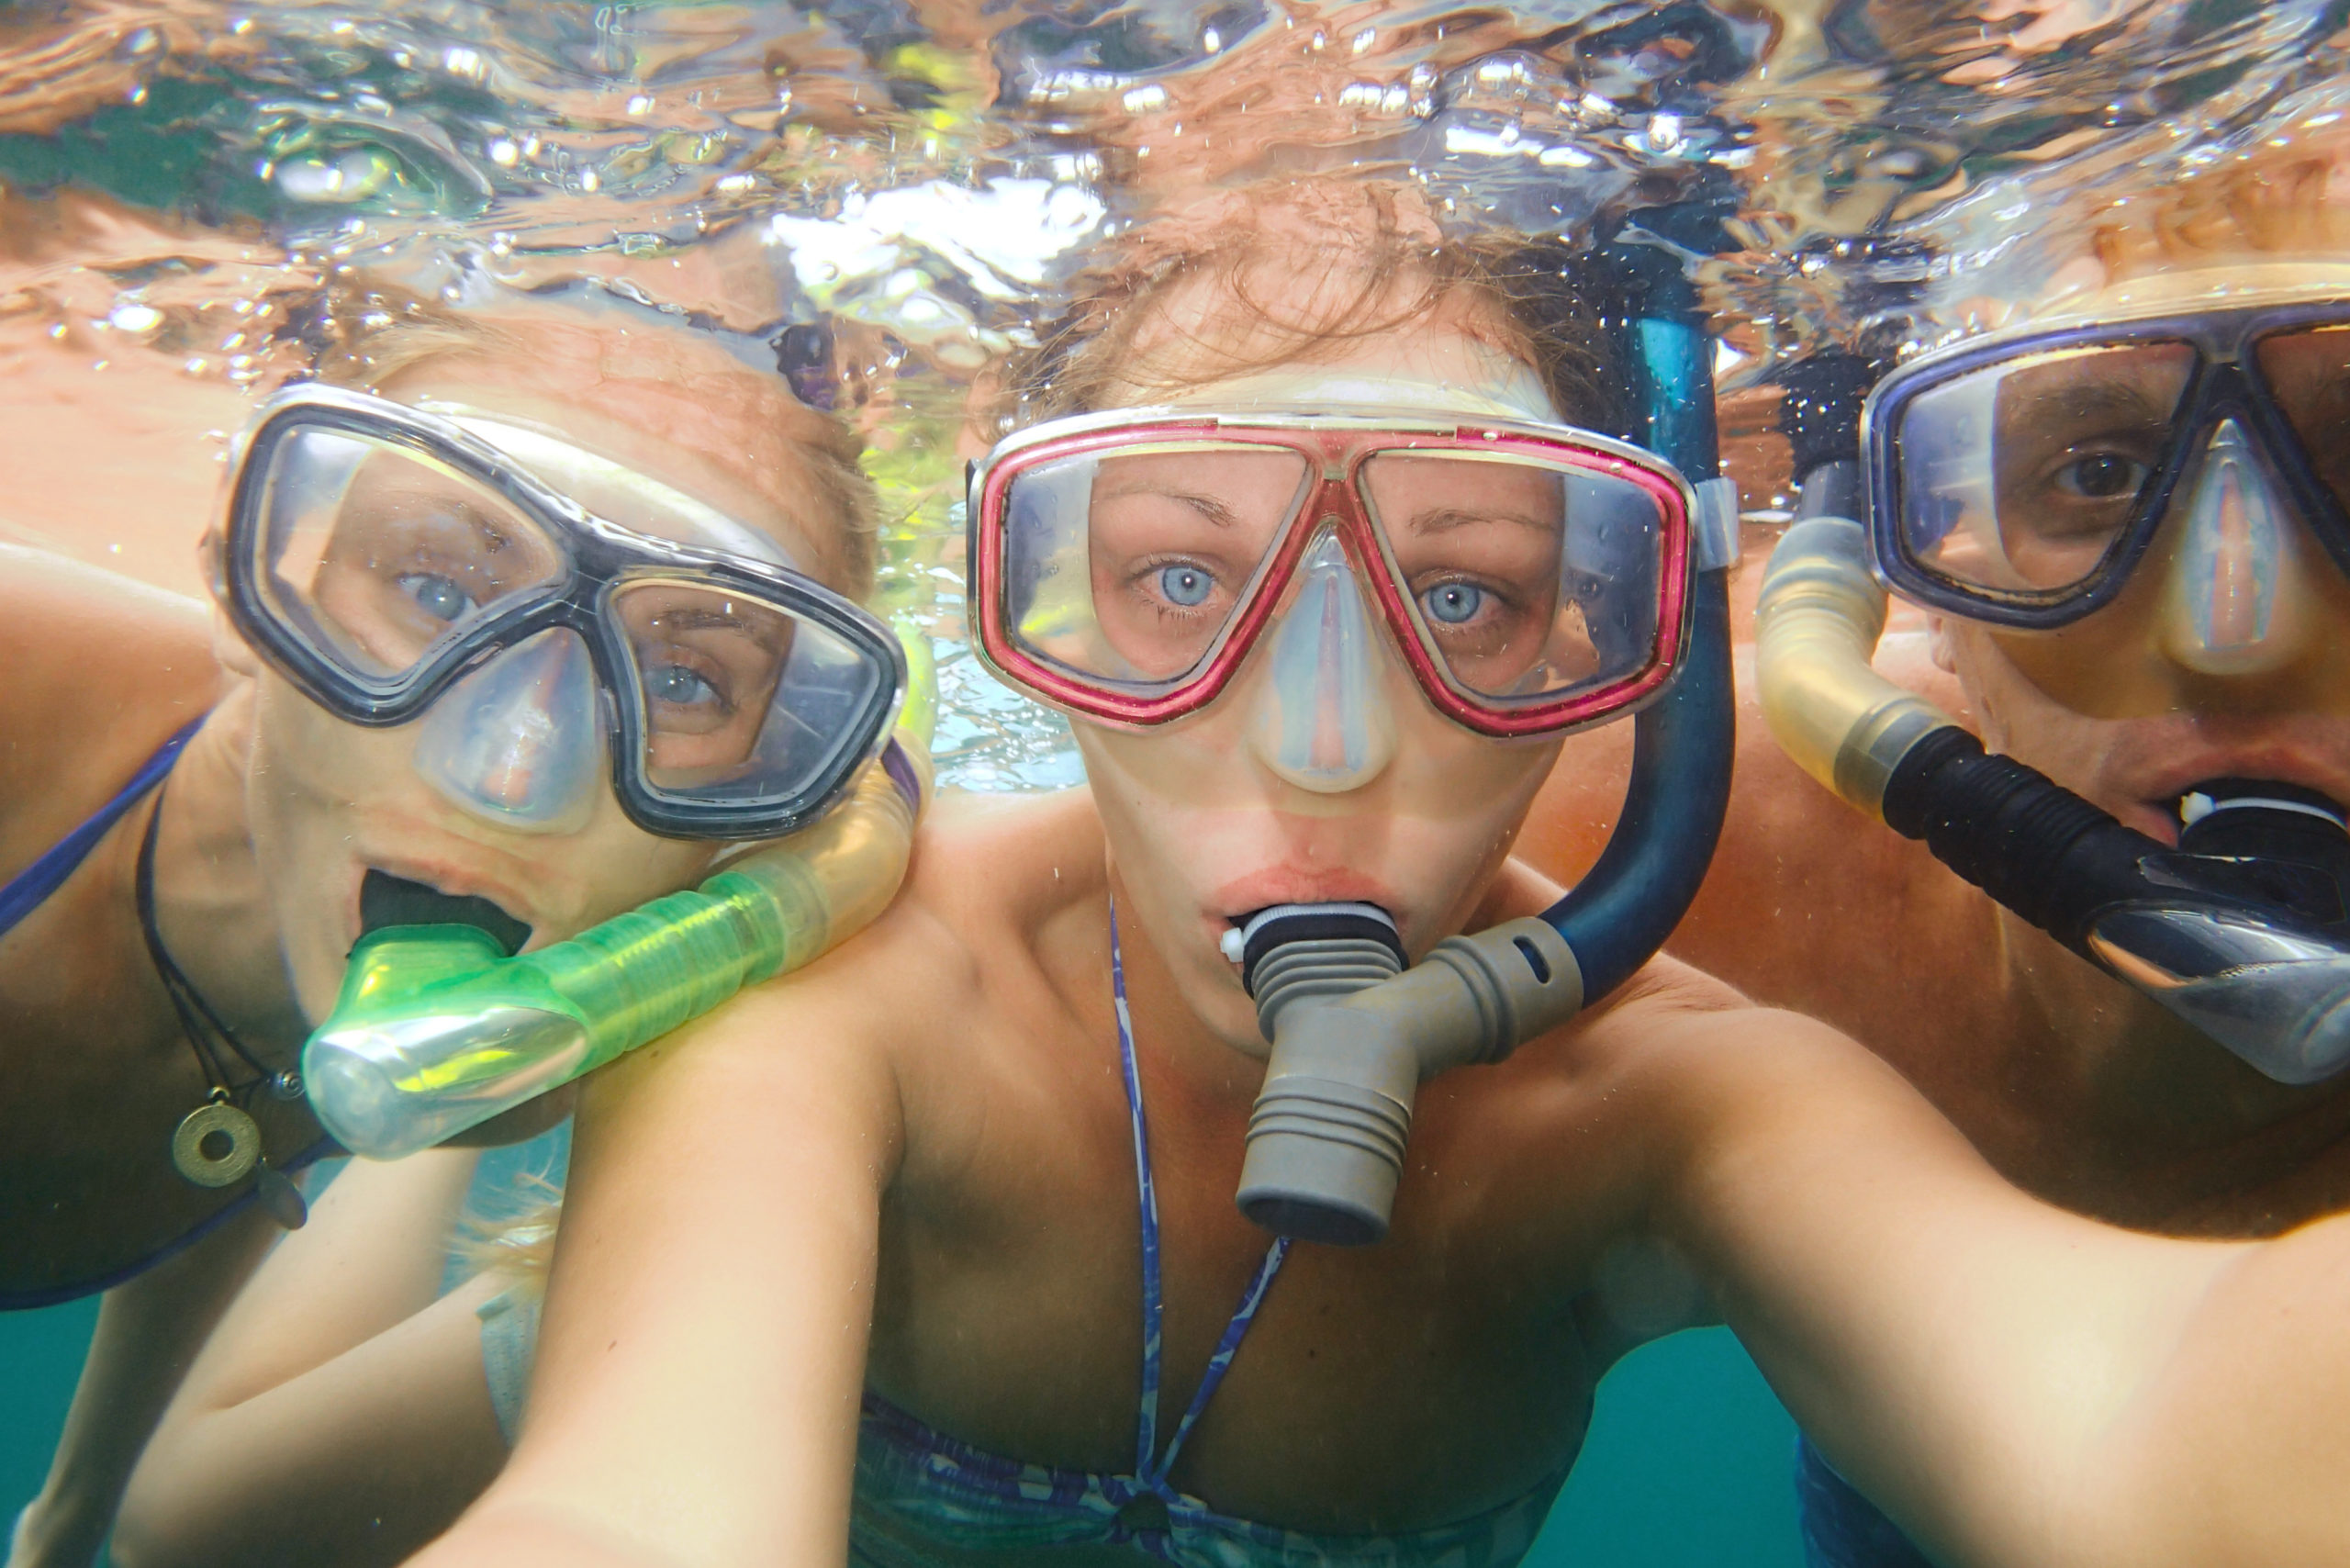 Underwater photo of a young people snorkeling at tropical ocean.